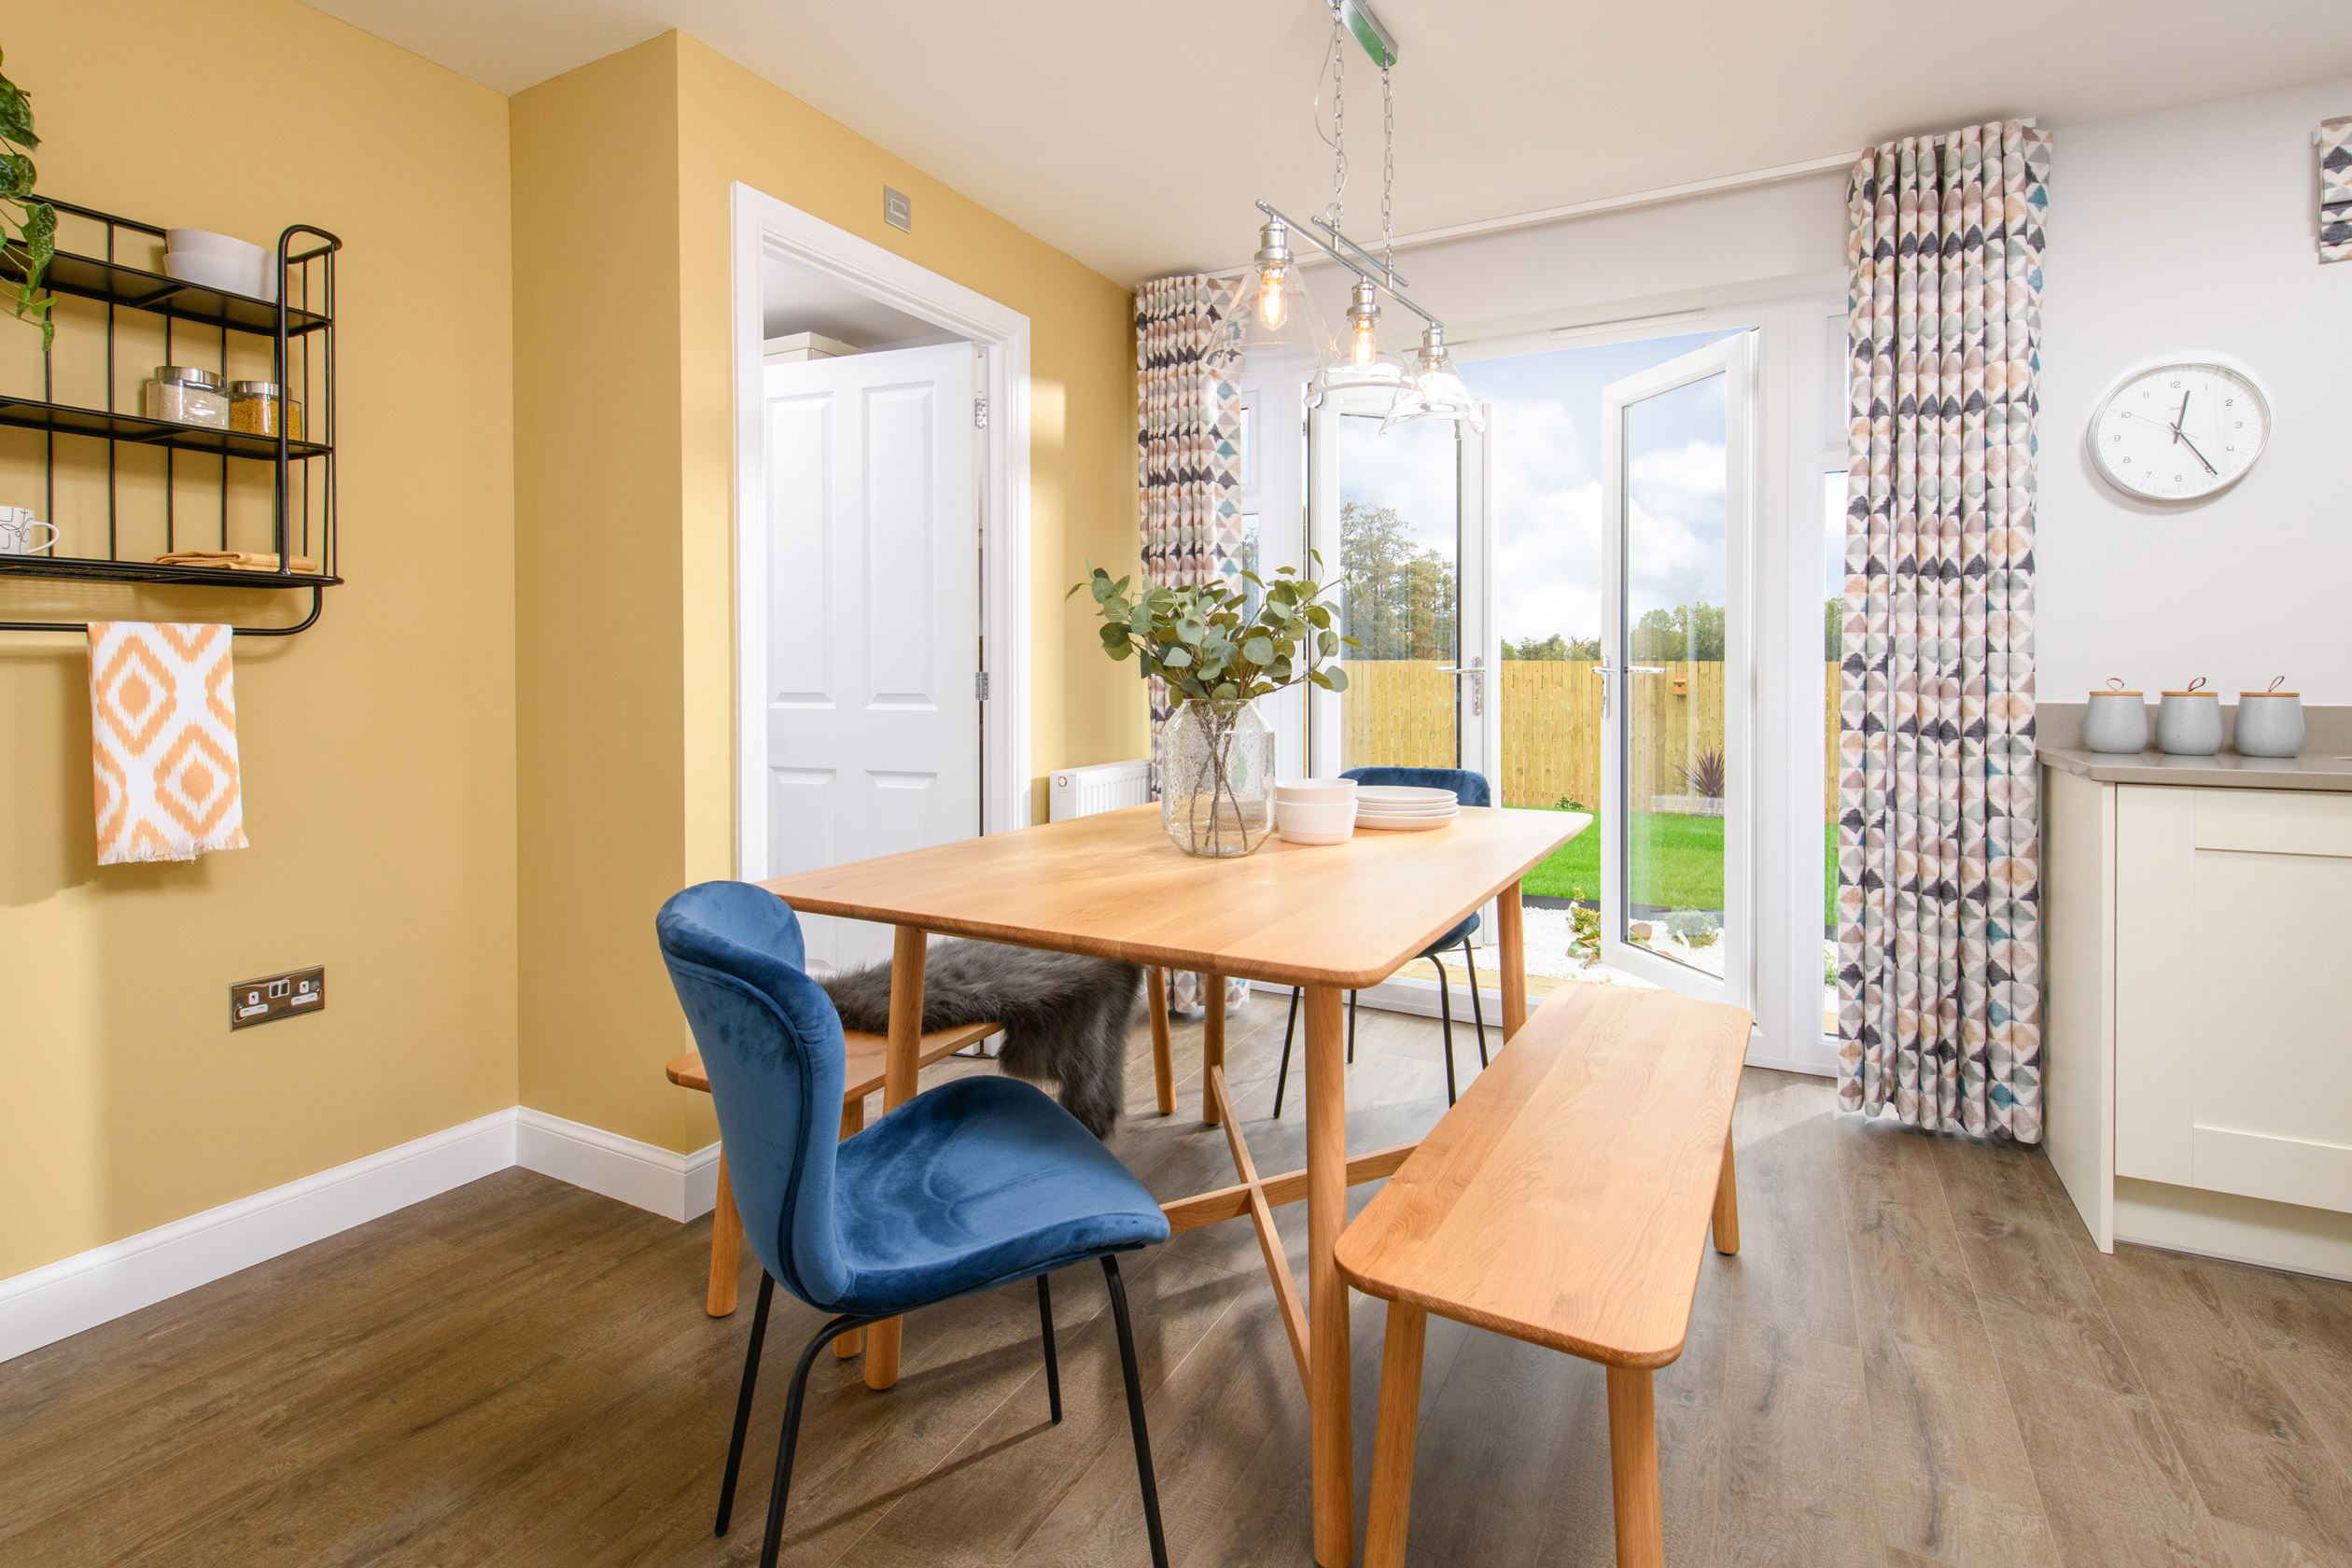 Property 3 of 8. Dining Area With French Doors In The Abbeydale 3 Bedroom Show Home